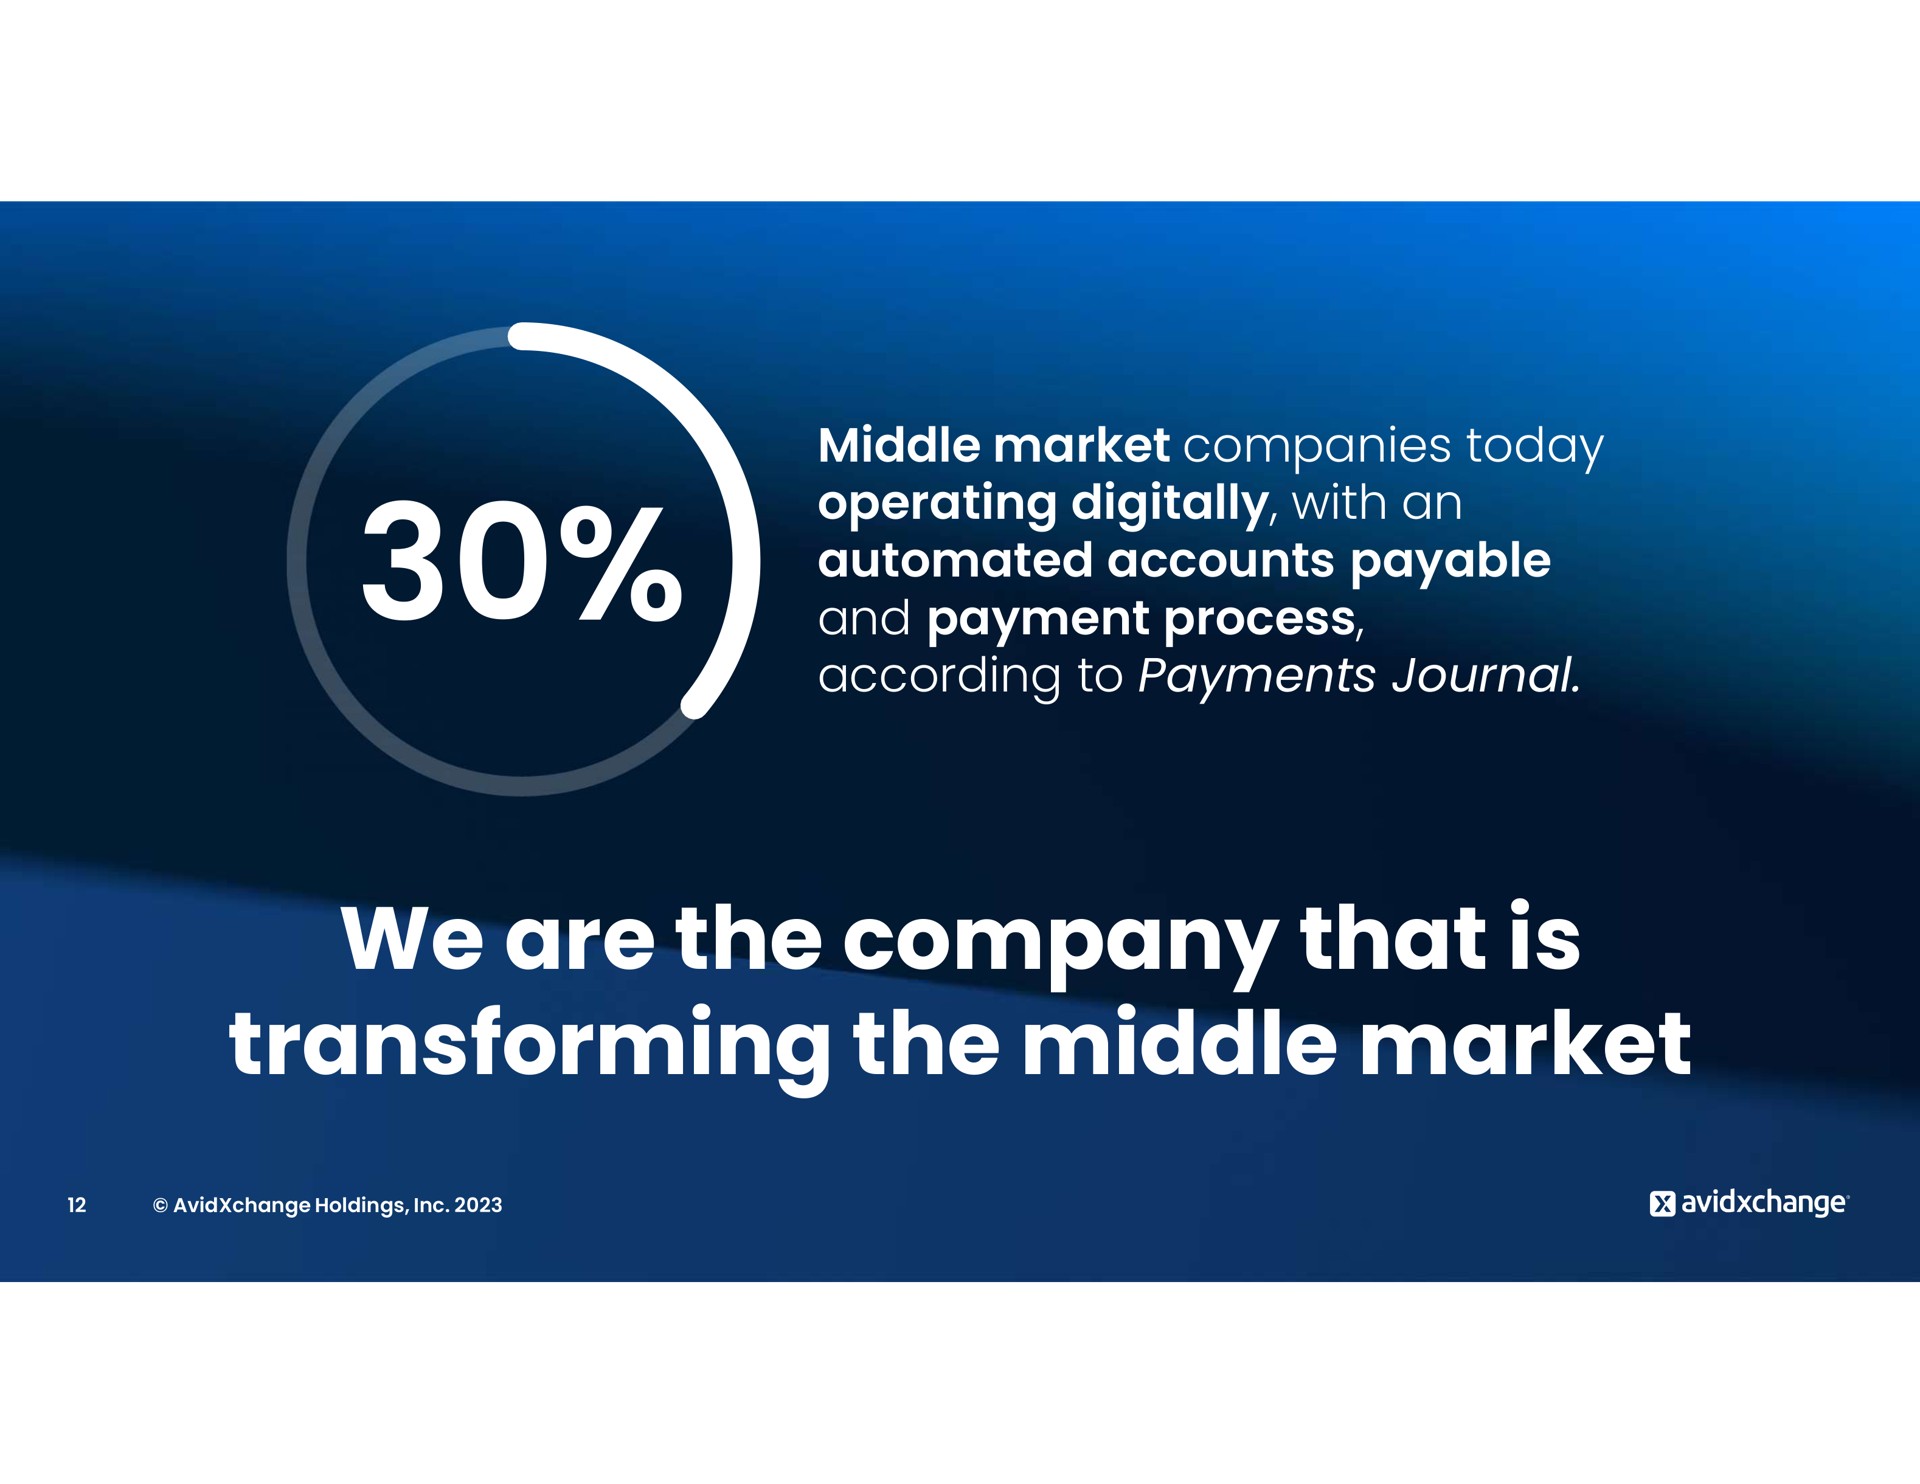 middle market companies today operating digitally with an accounts payable and payment process according to payments journal we are the company that is transforming the middle market | AvidXchange